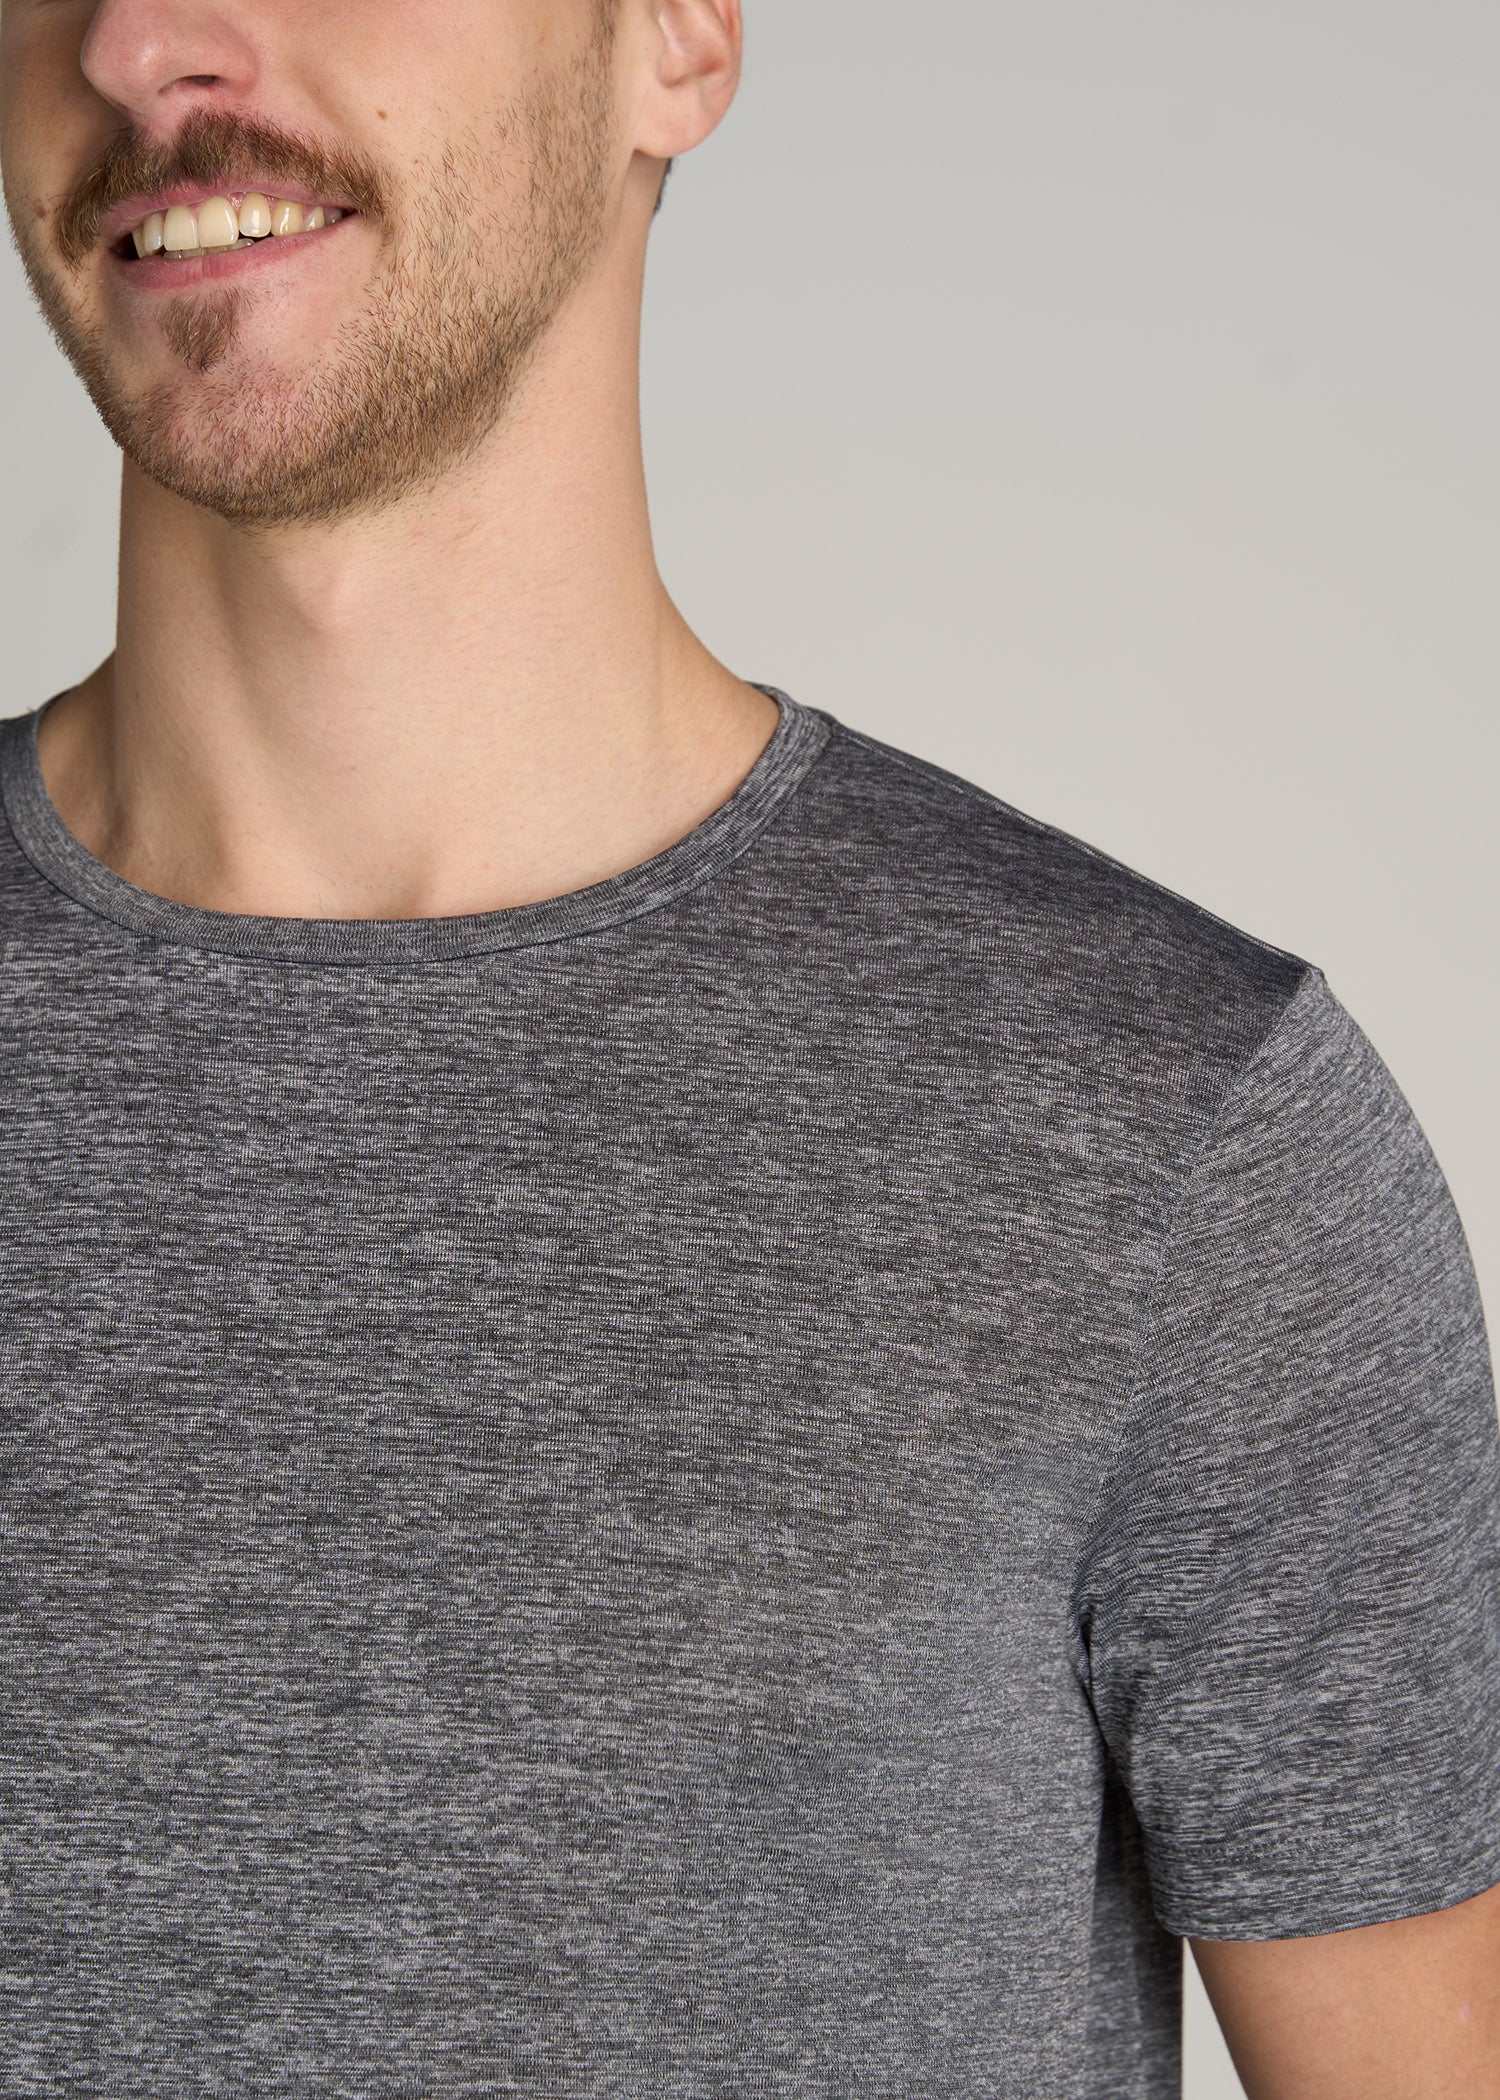     American-Tall-Men-Performance-MODERN-FIT-Athletic-Jersey-Tee-Grey-Mix-detail